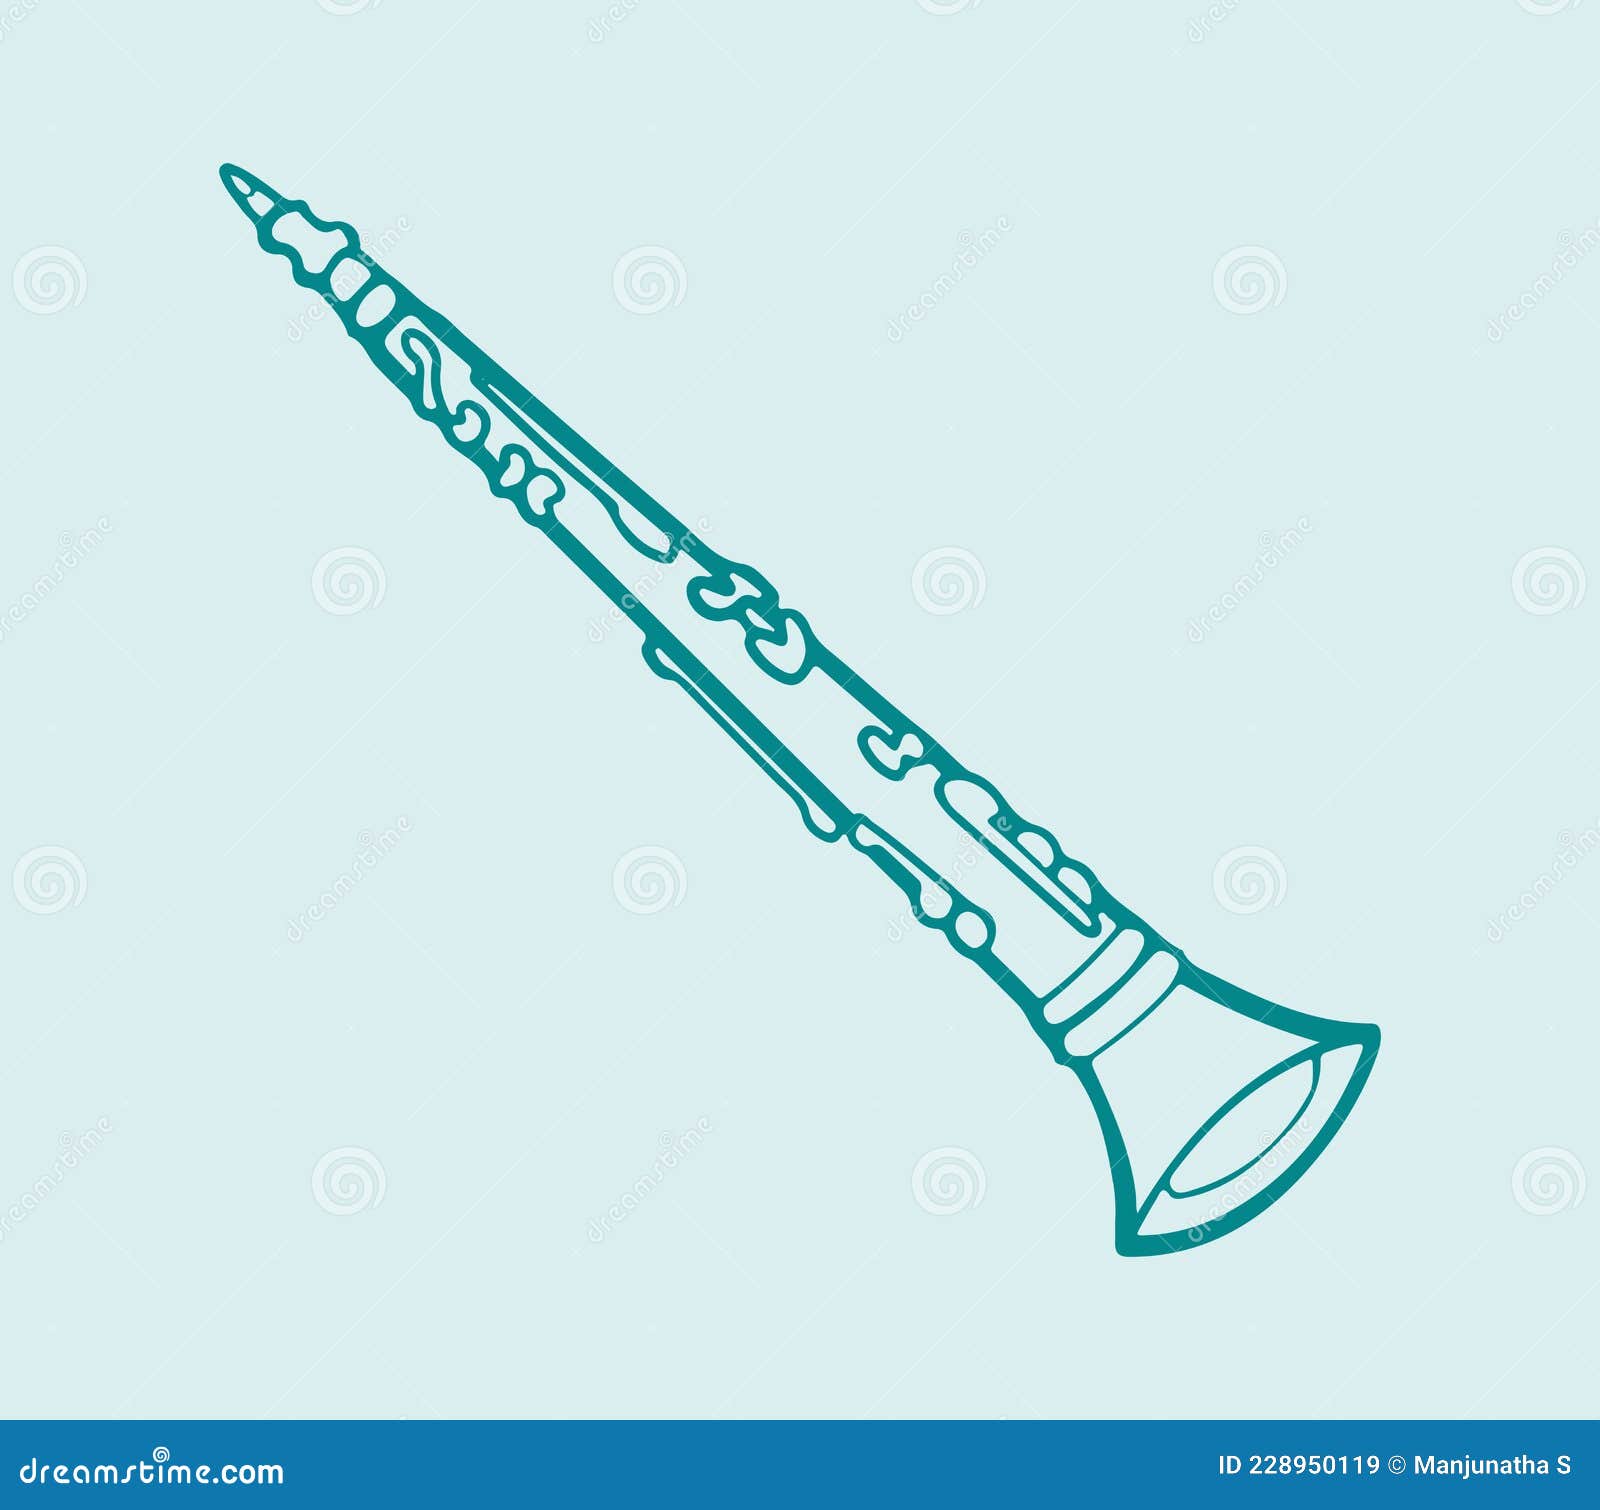 Child sweet flute Stock Photos Royalty Free Child sweet flute Images   Depositphotos